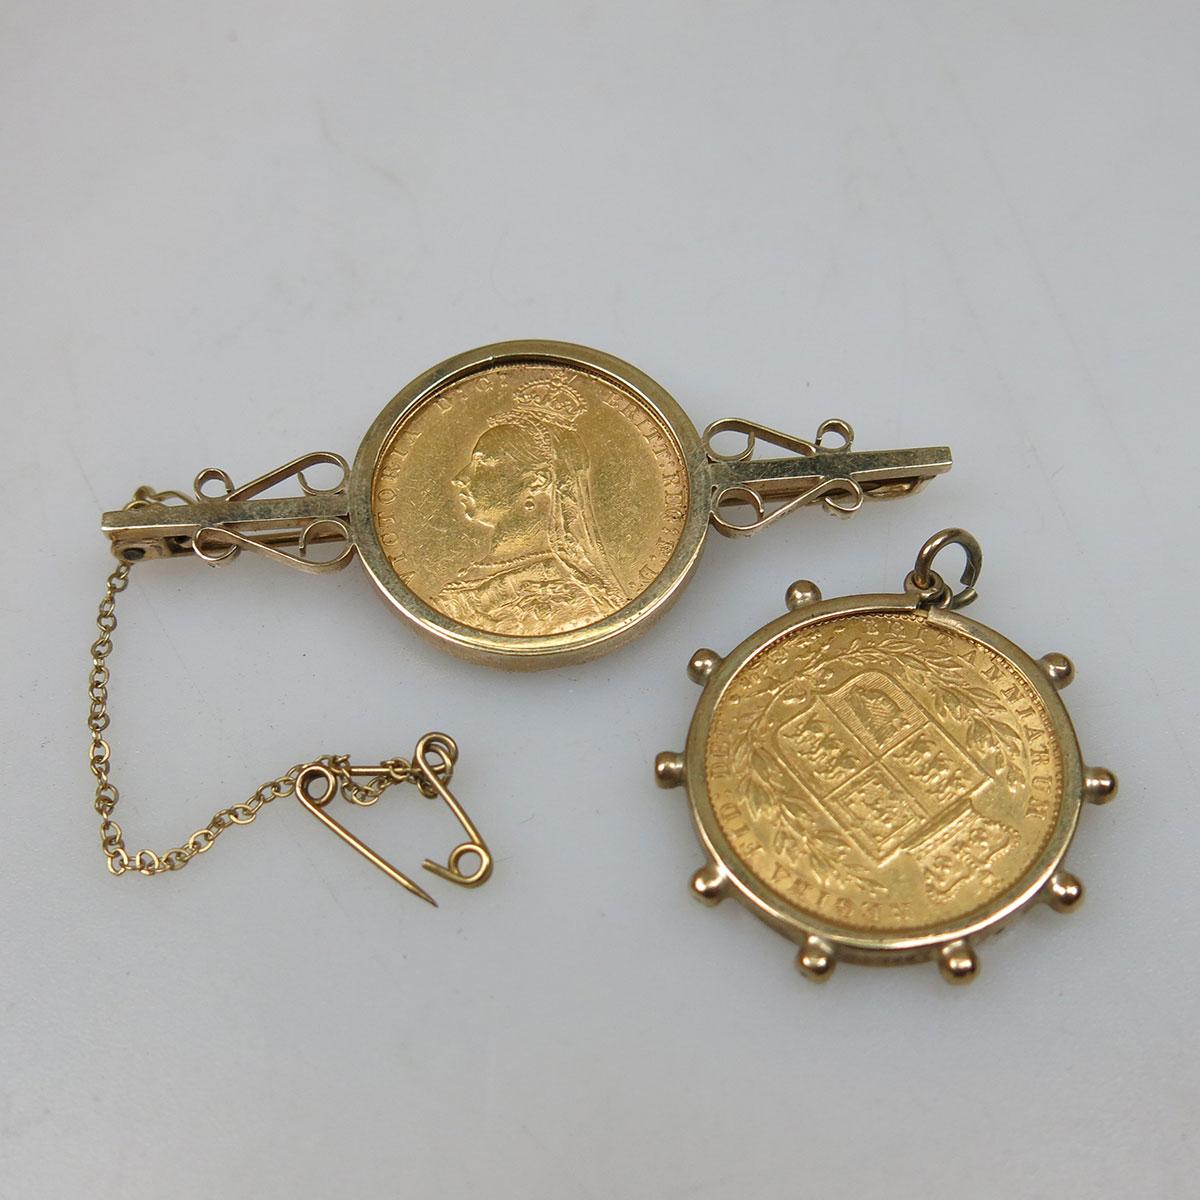 2 x English 9k Yellow Gold Pendant And Brooch Mounts